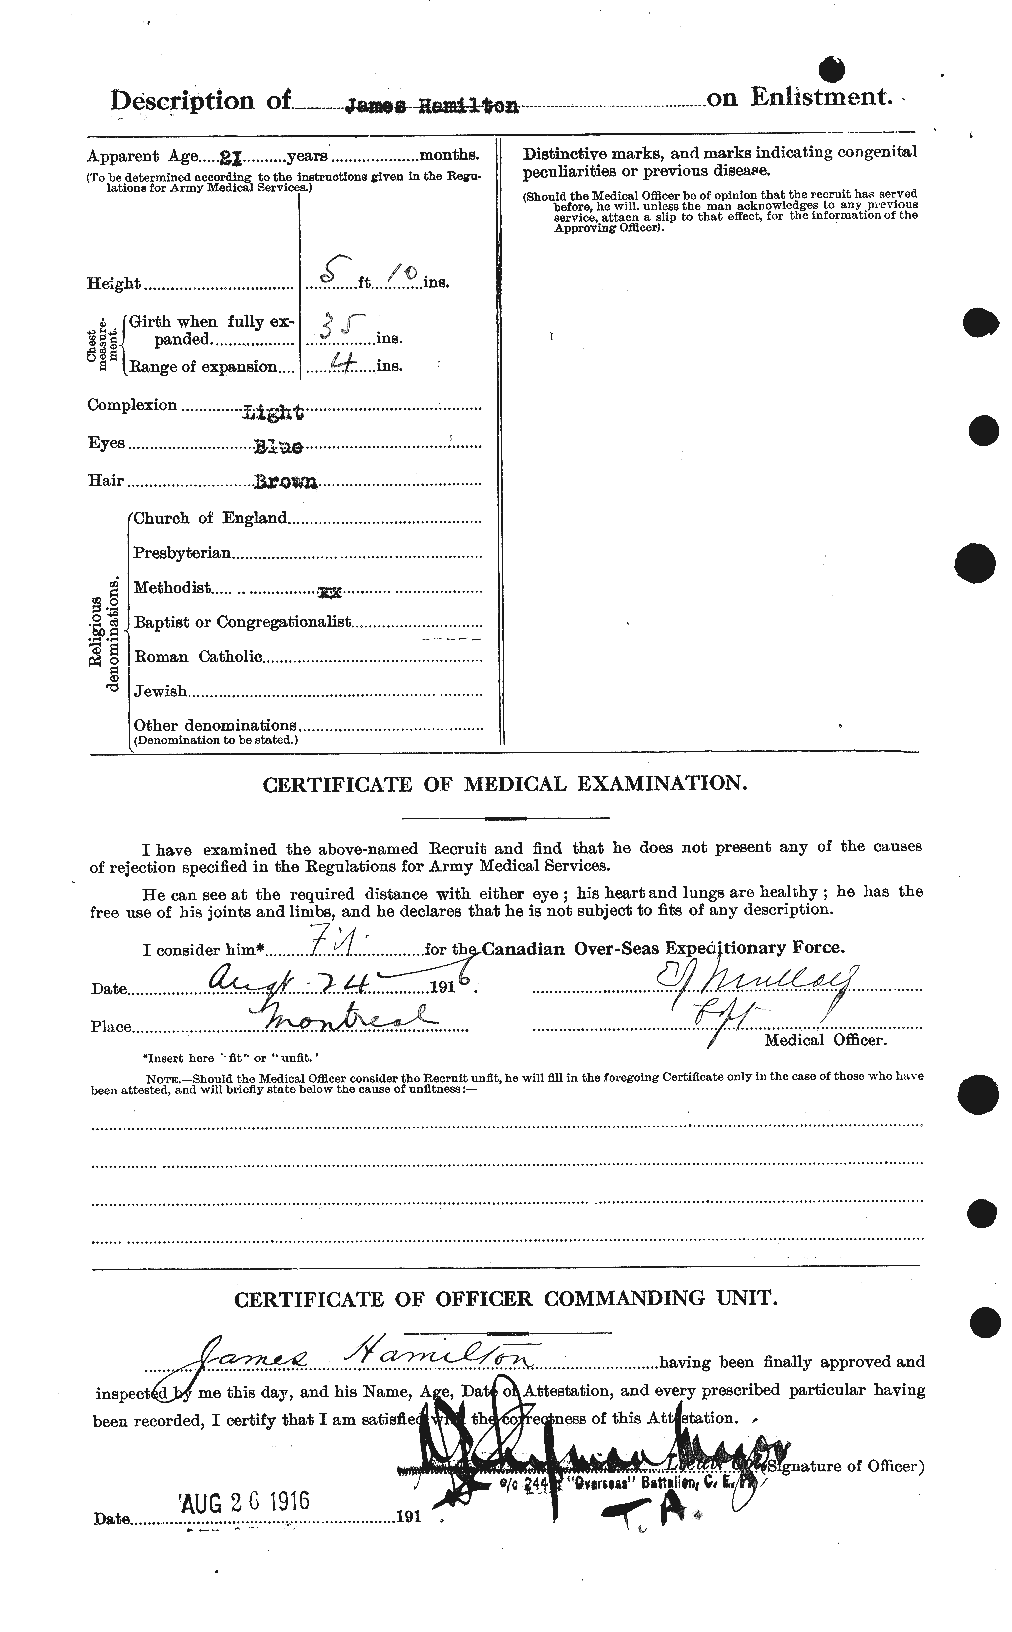 Personnel Records of the First World War - CEF 372955b